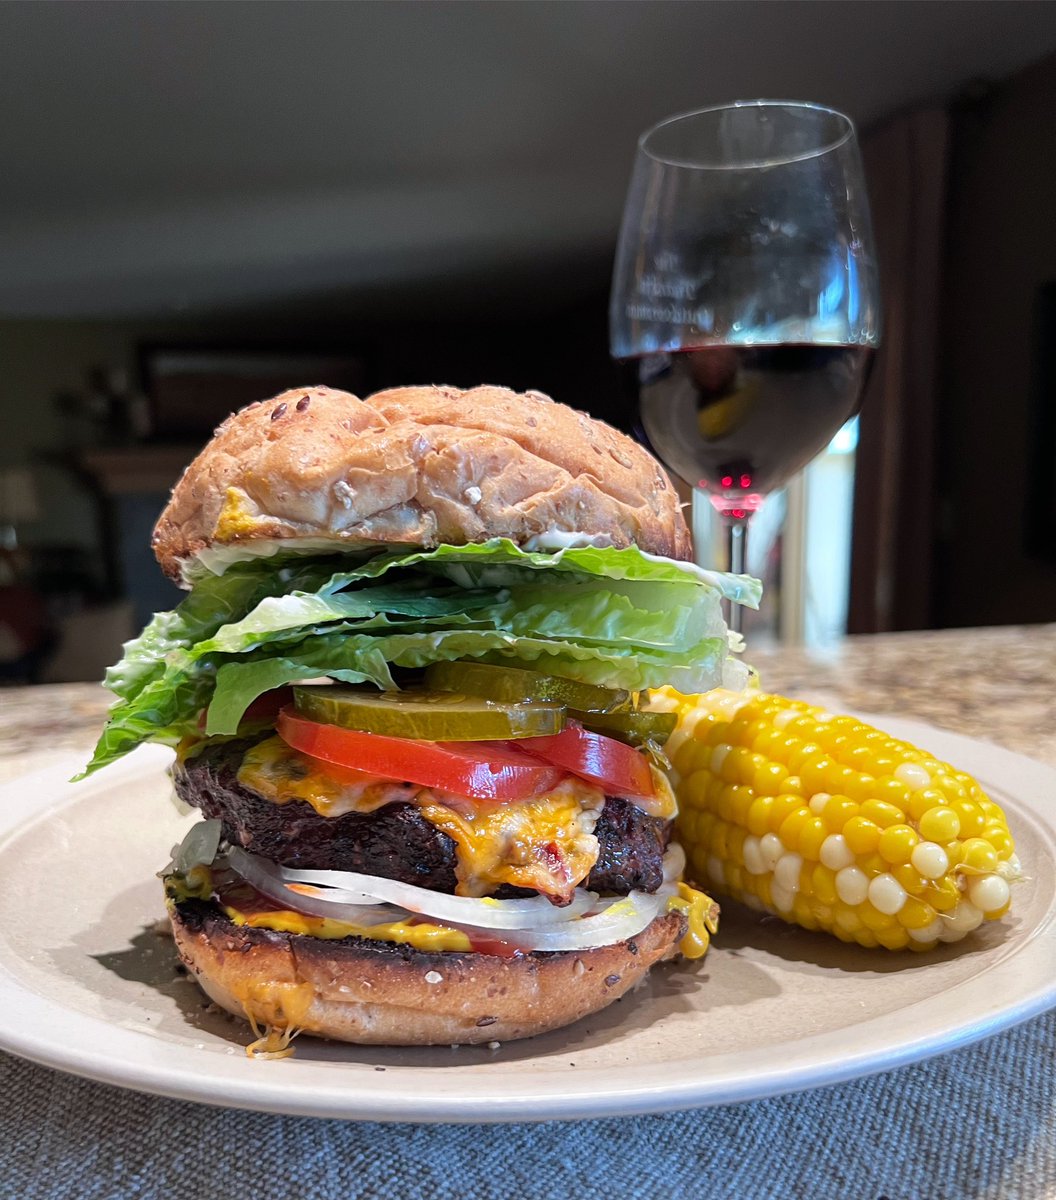 Although I ate like a king at my friend’s place while turkey hunting in Ontario, it’s hard to beat having a venison cheeseburger & glass of wine at home with your wife